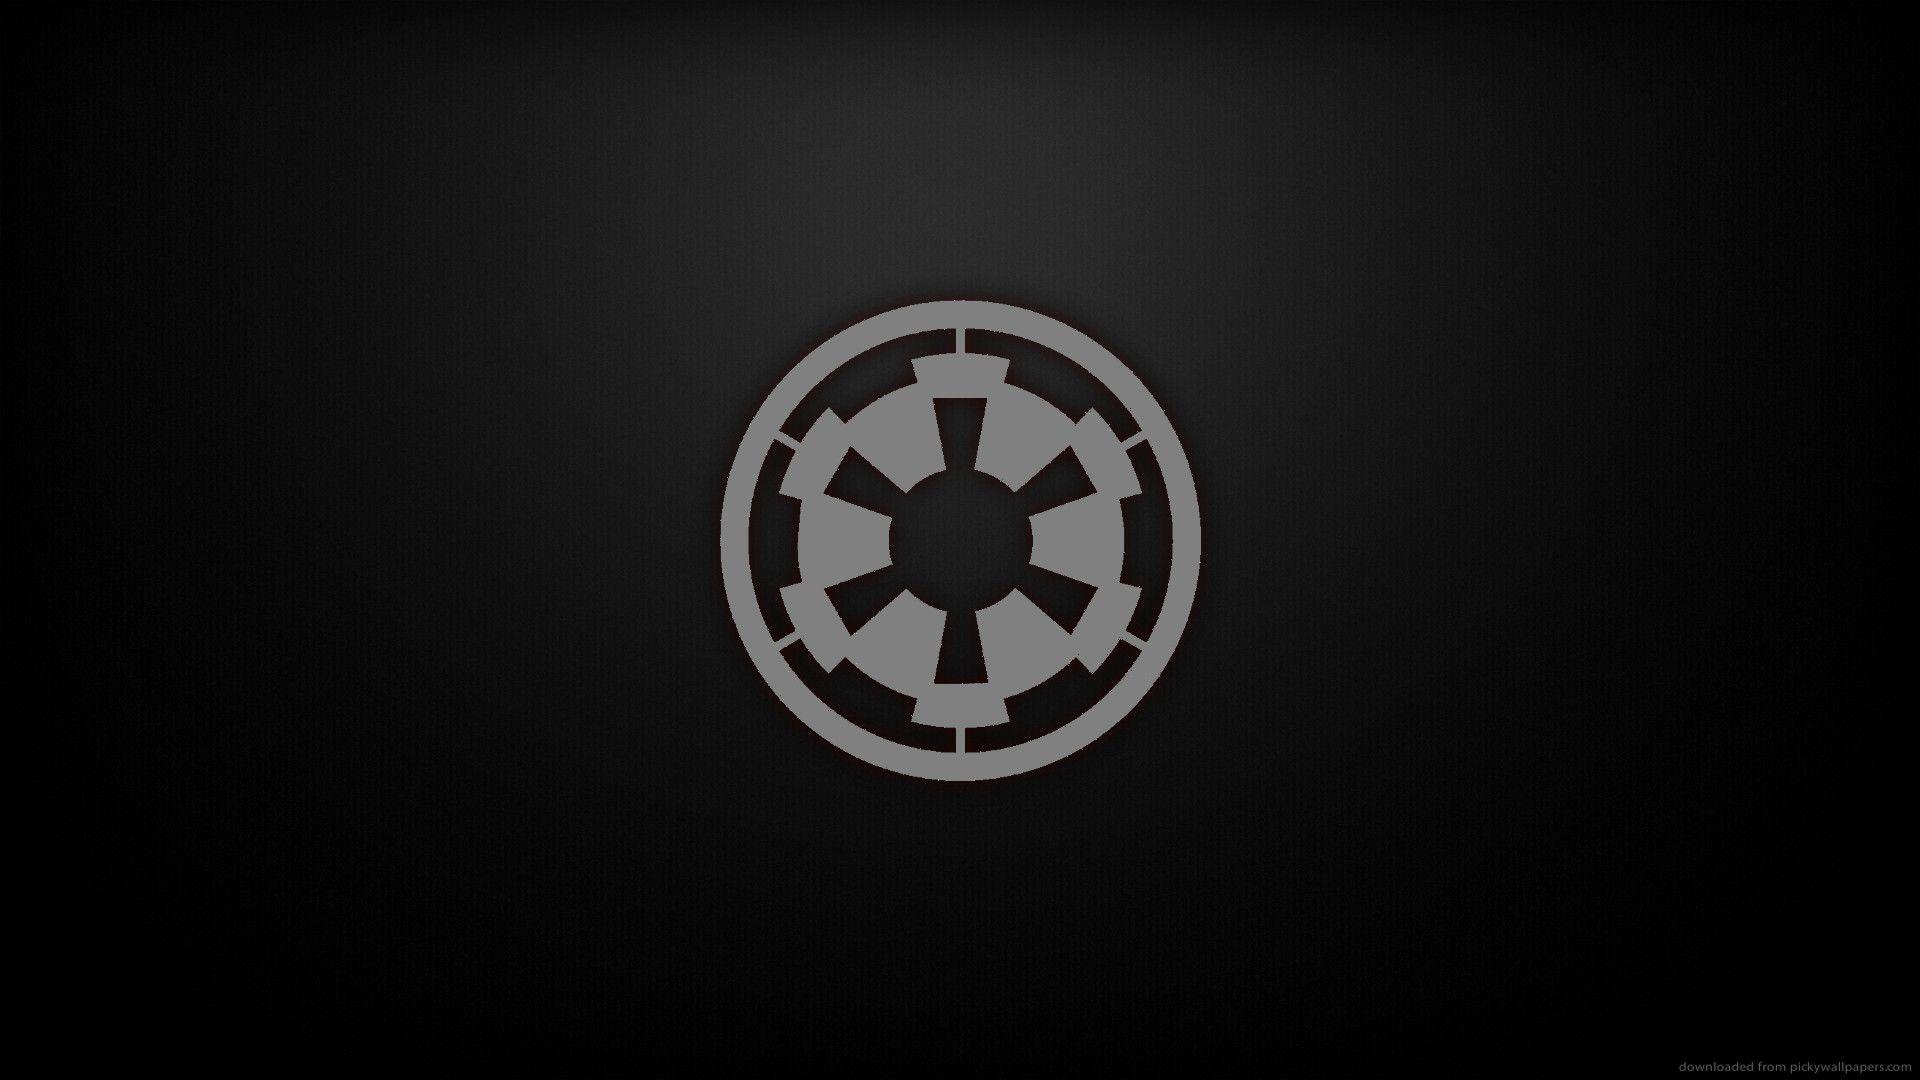 A wallpaper you guys might like. The Jedi Order emblem. I'll do a